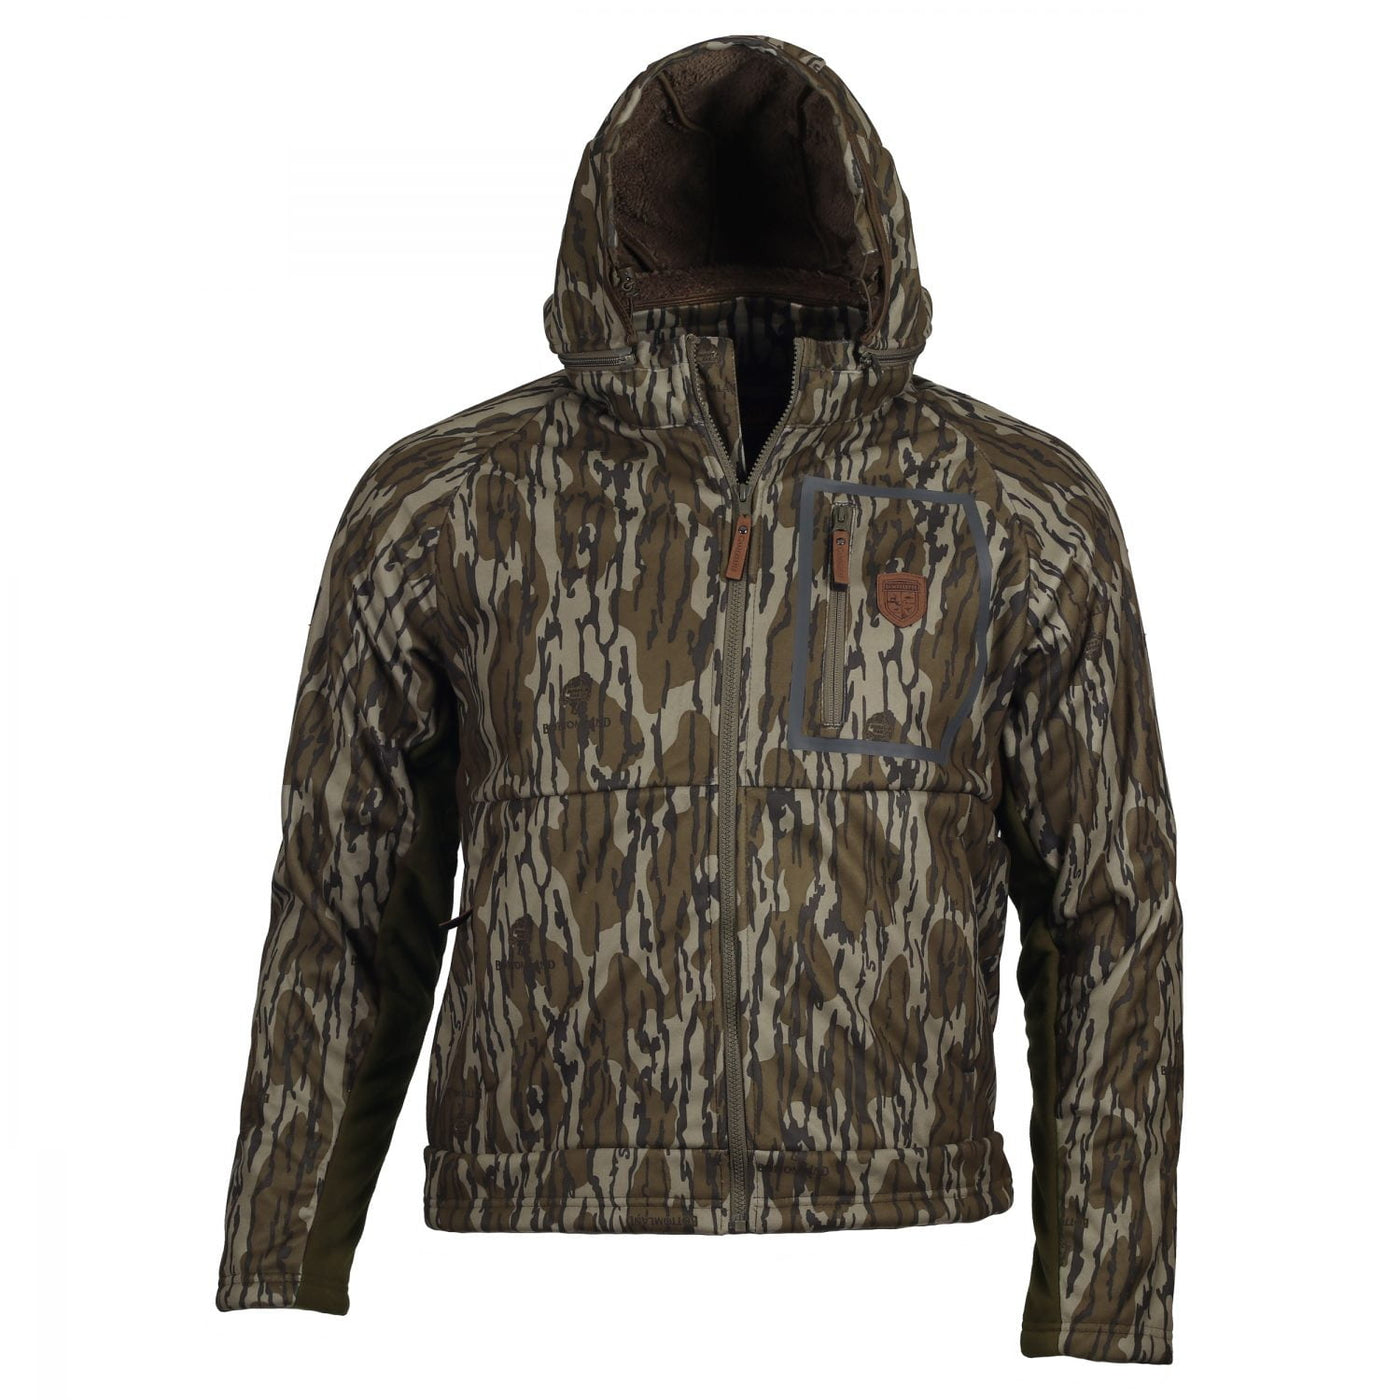 Gamekeeper Harvester Jacket-CAMO CLOTHING-Bottomland-2XL-Kevin's Fine Outdoor Gear & Apparel